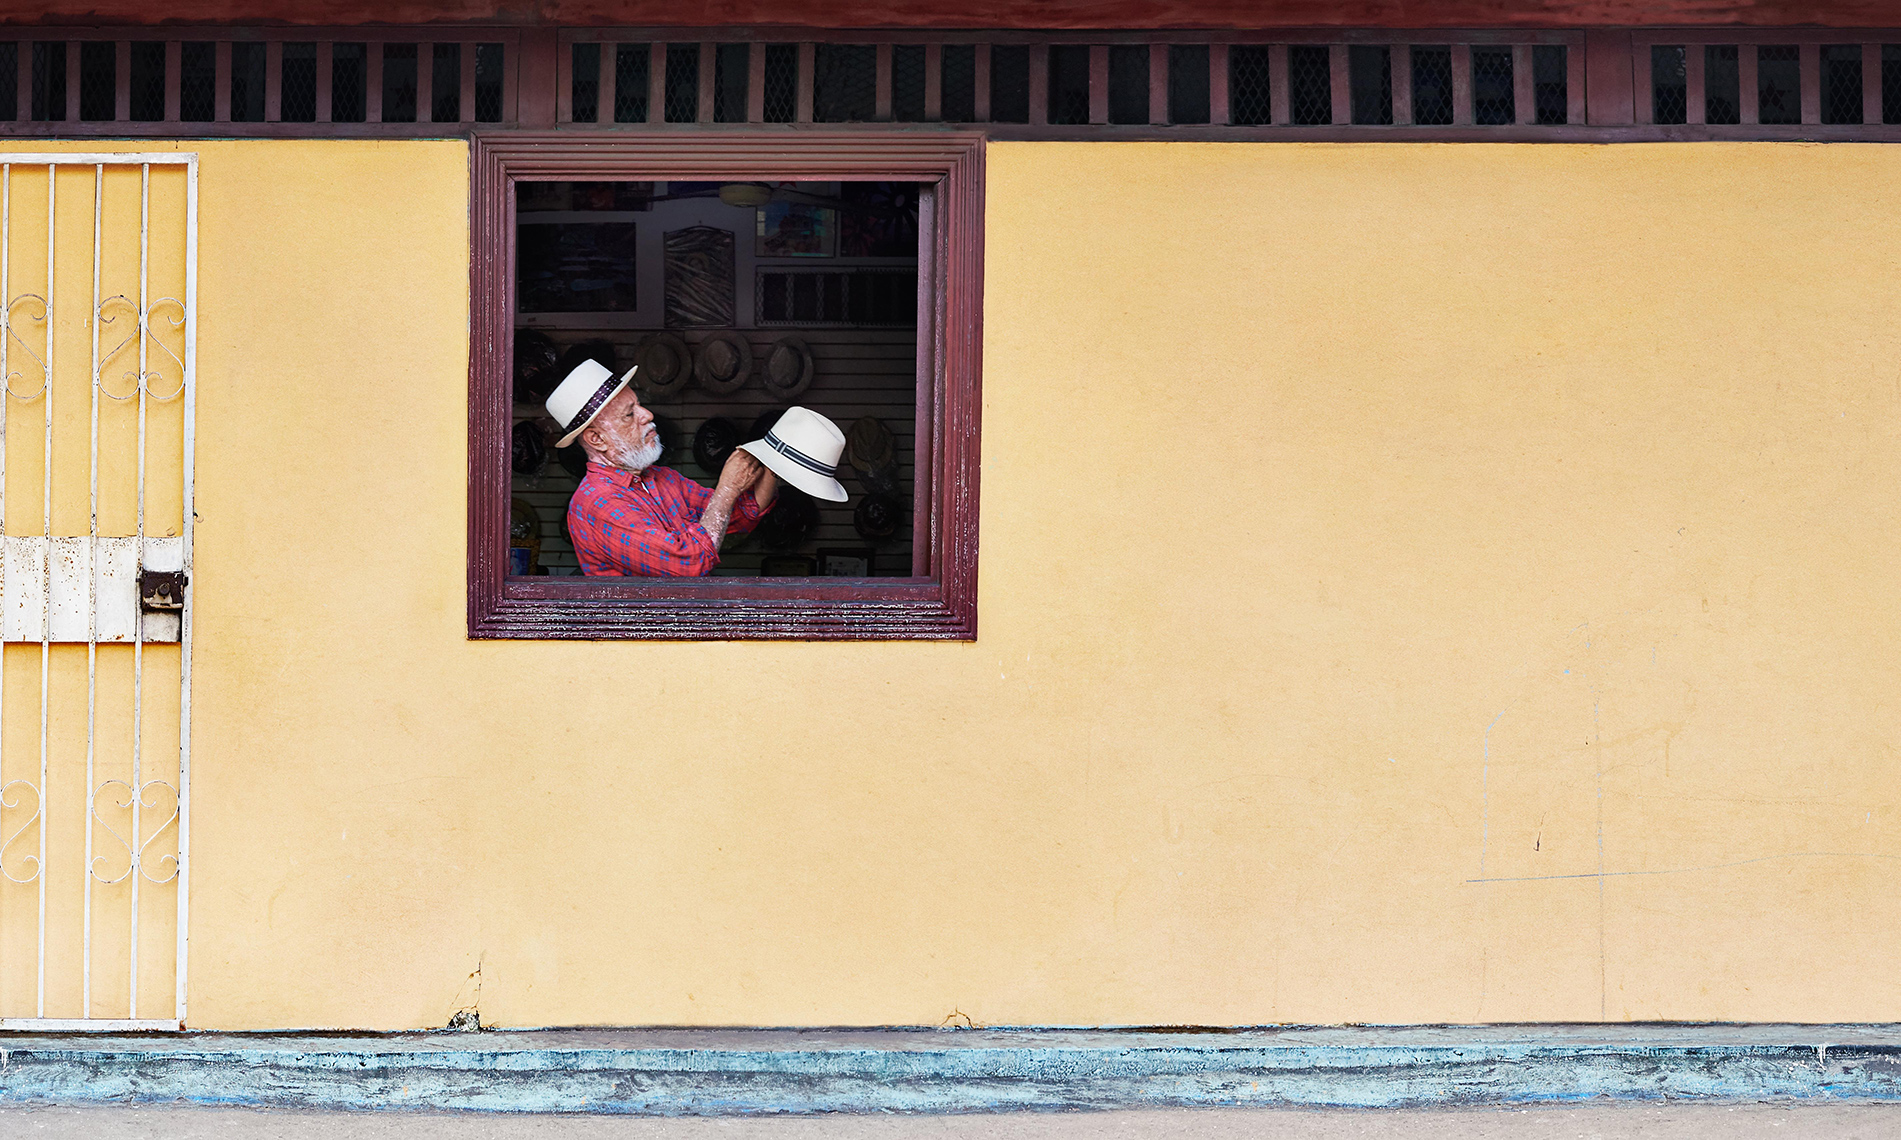 A Panama Hat maker inspects his latest creation in the El Chorrillo neighbourhood of Panama City